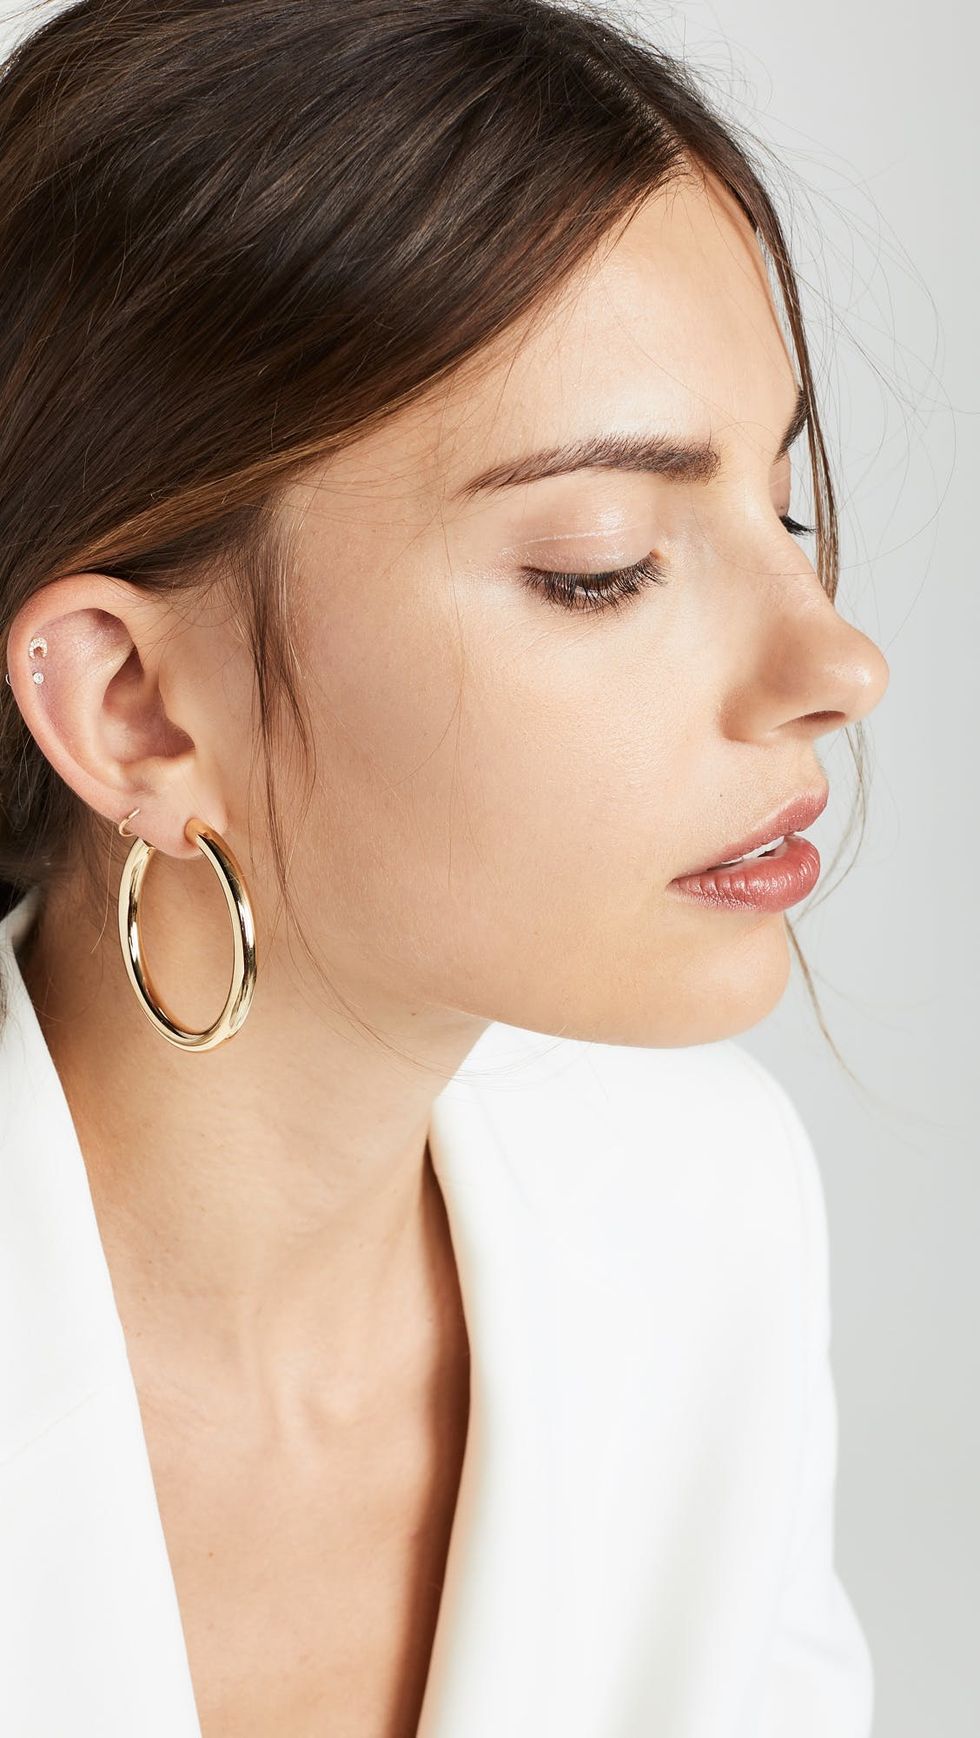 Are Gold Hoops the New Power Accessory? - Brit + Co